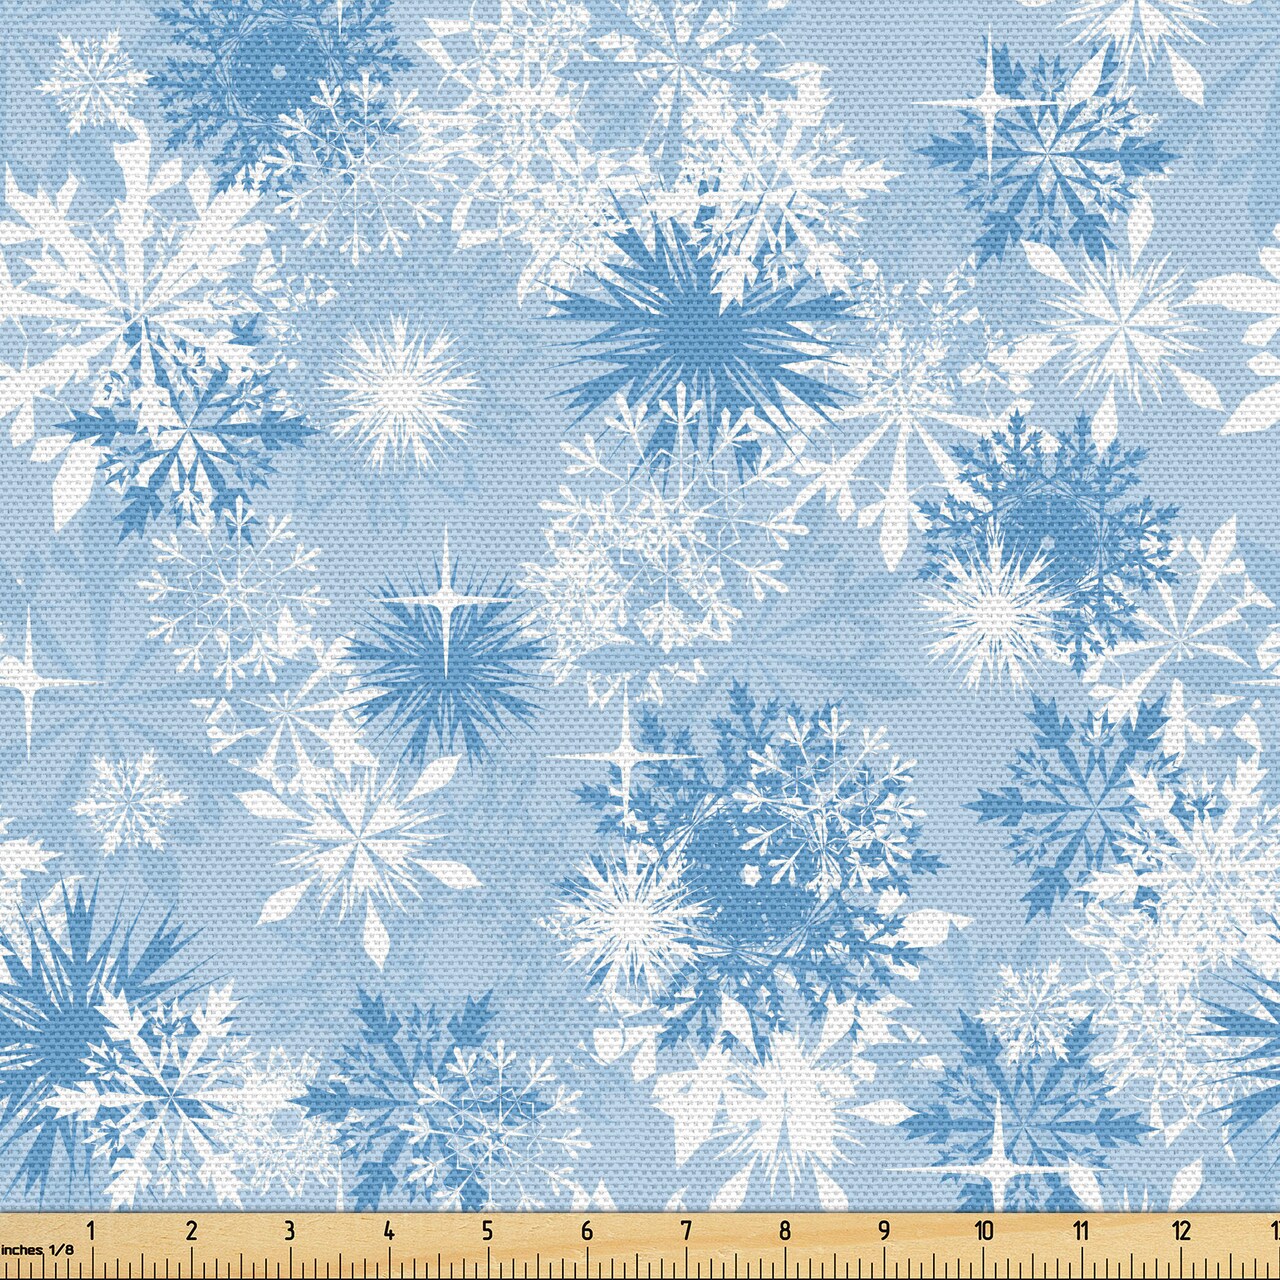 Ambesonne Snowflake Fabric by the Yard, Winter Holiday Illustration Christmas Snowflakes on Abstract Background, Decorative Fabric for Upholstery and Home Accents, 5 Yards, Pale Blue White